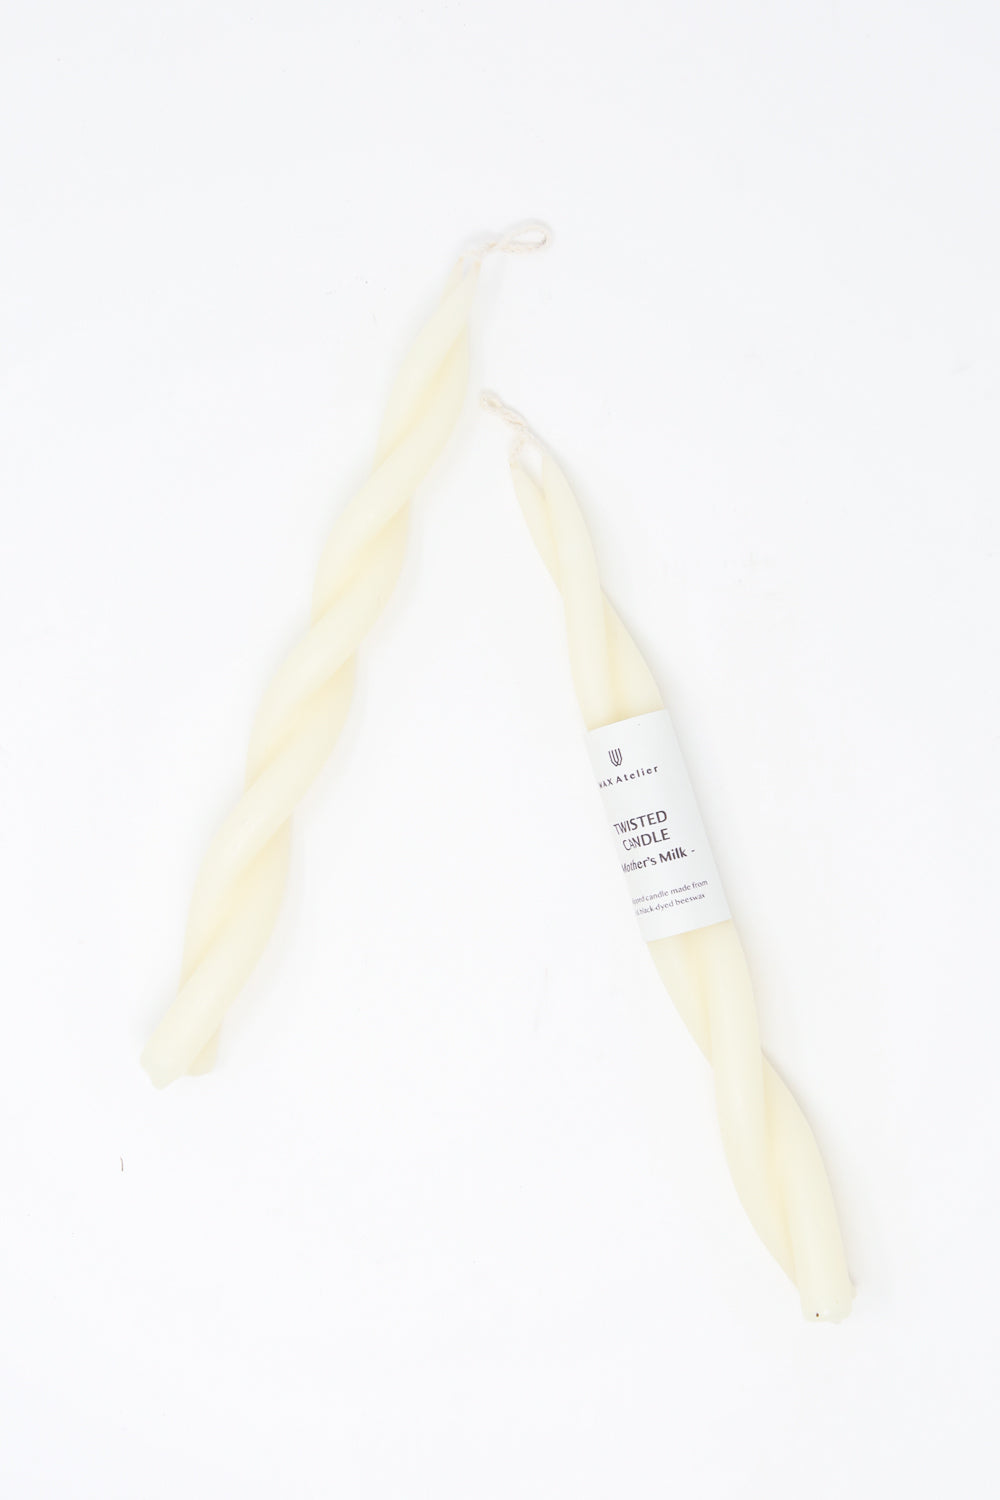 Two Hand Twisted Beeswax Candles in Mother's Milk by Wax Atelier on a white background.